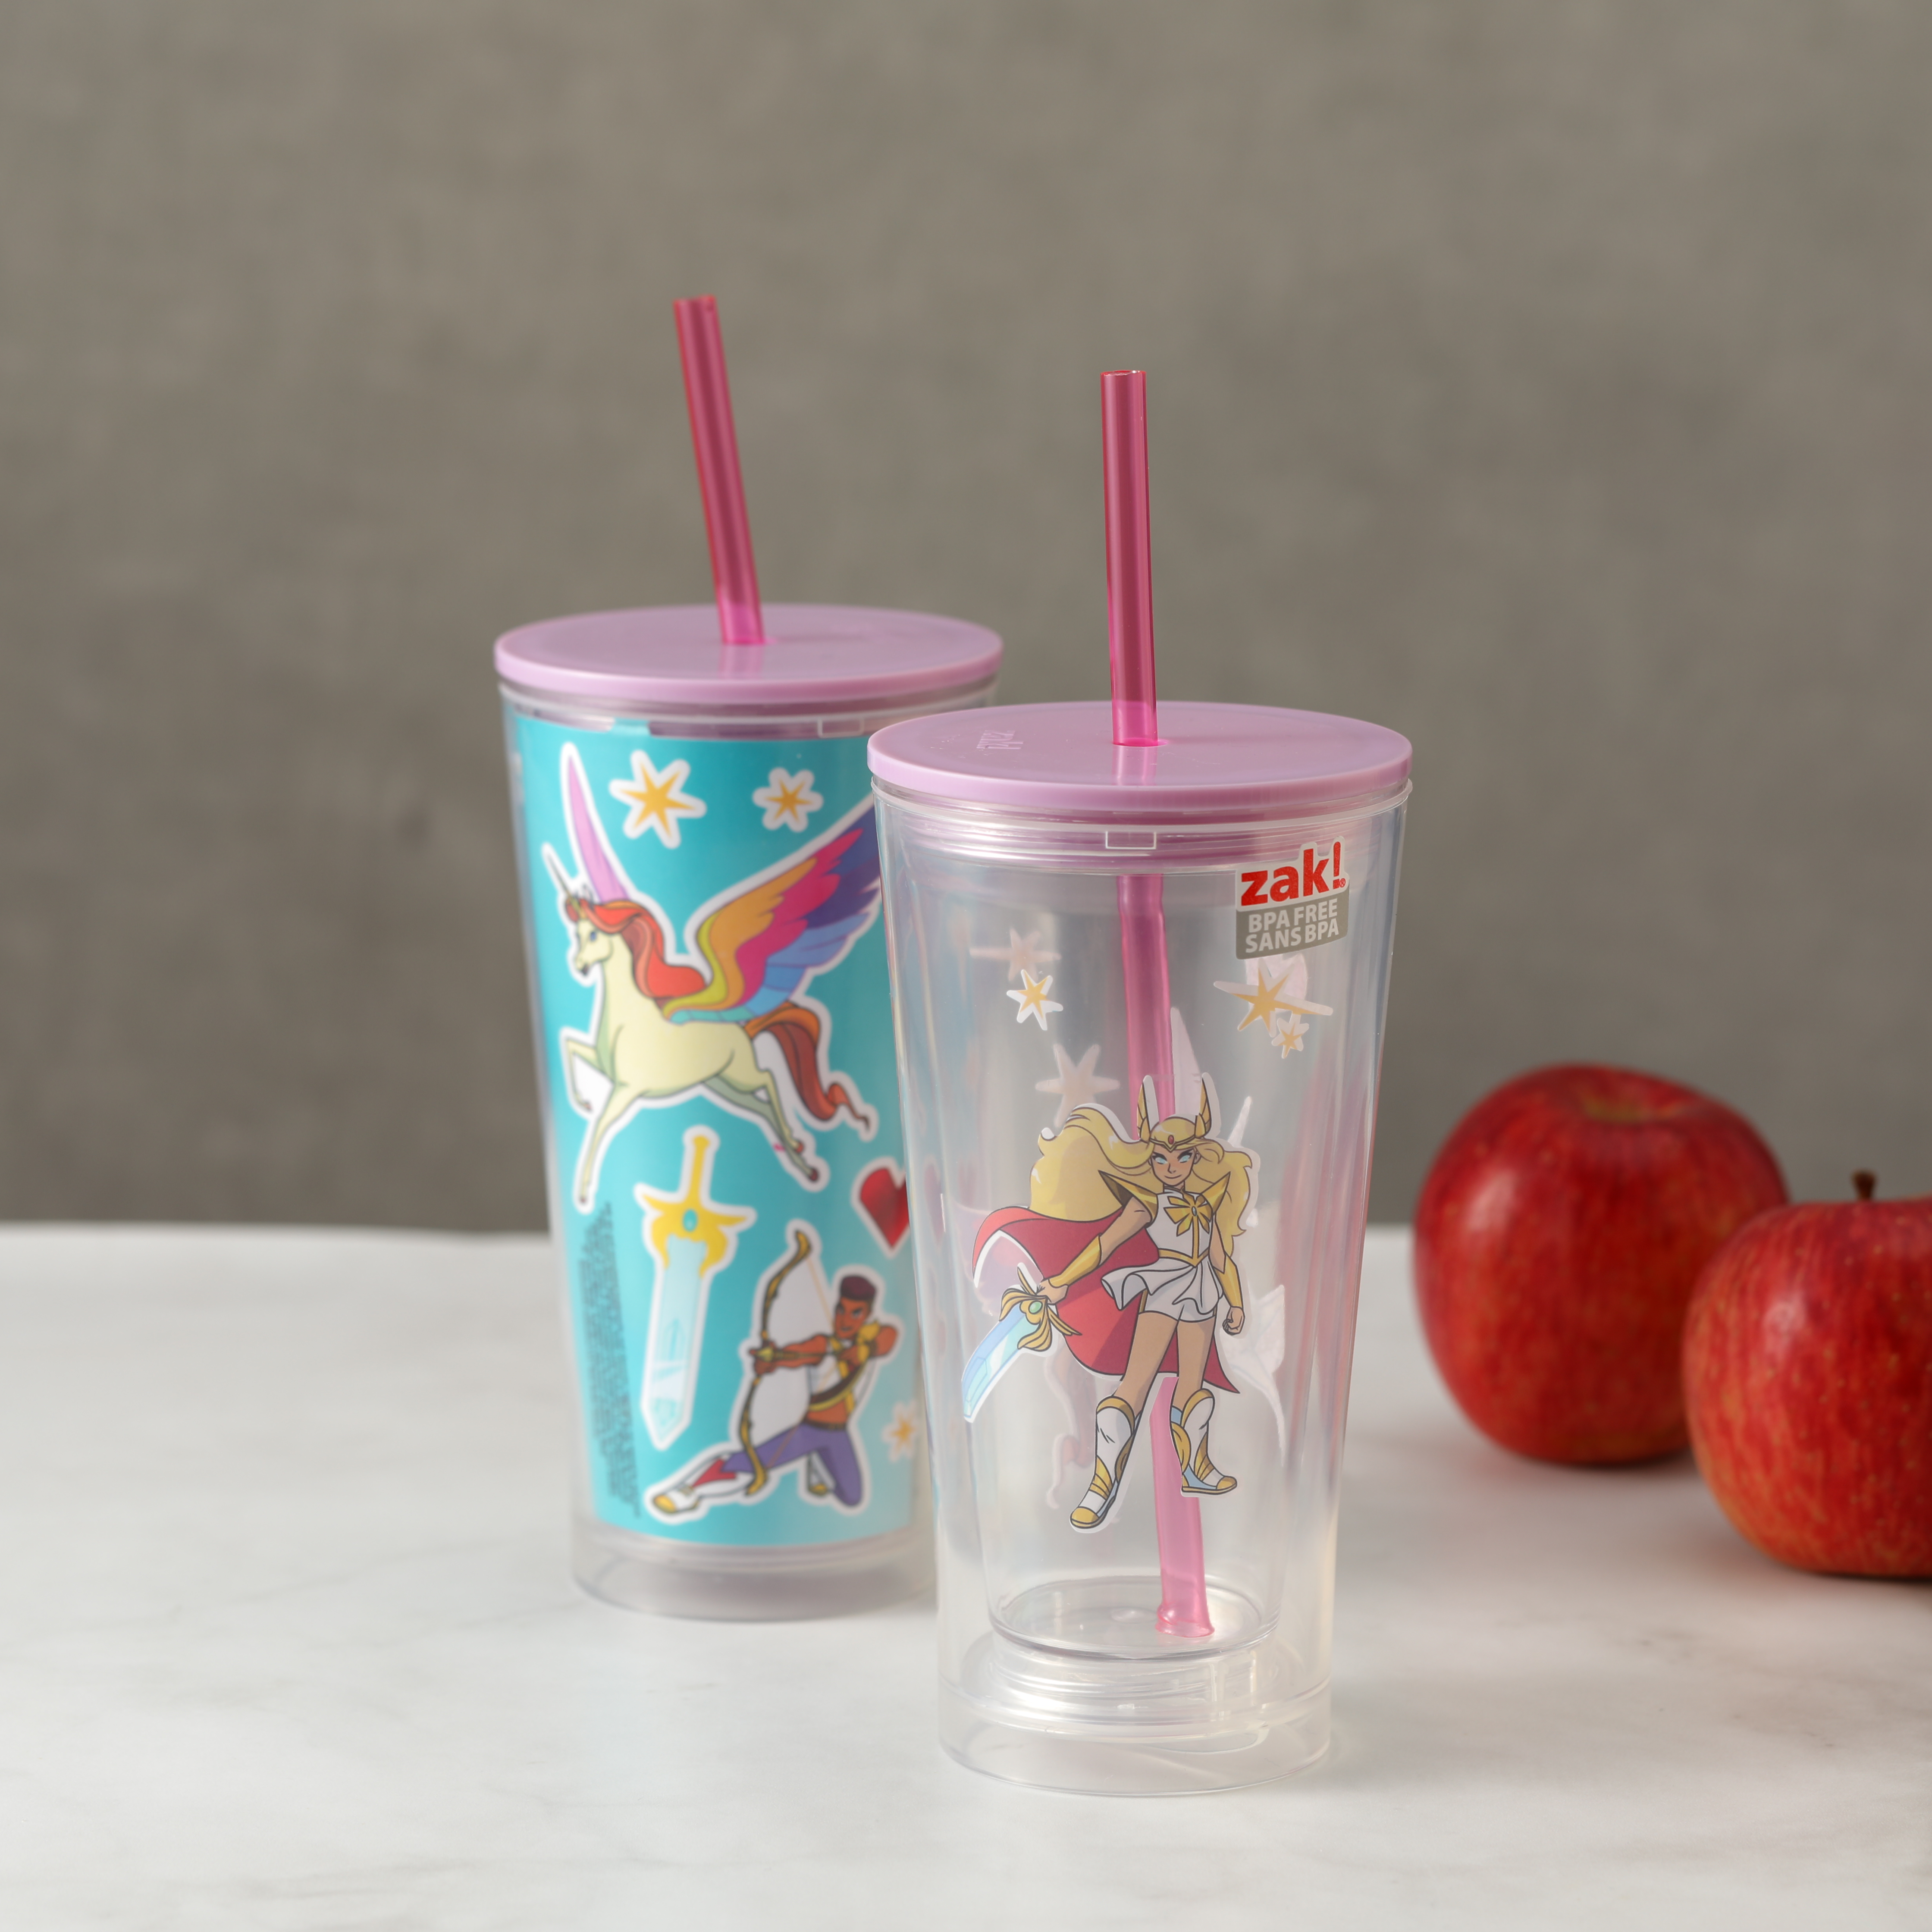 She-Ra 16 ounce Plastic Cup with Lid and Straw, Princess of Power slideshow image 2